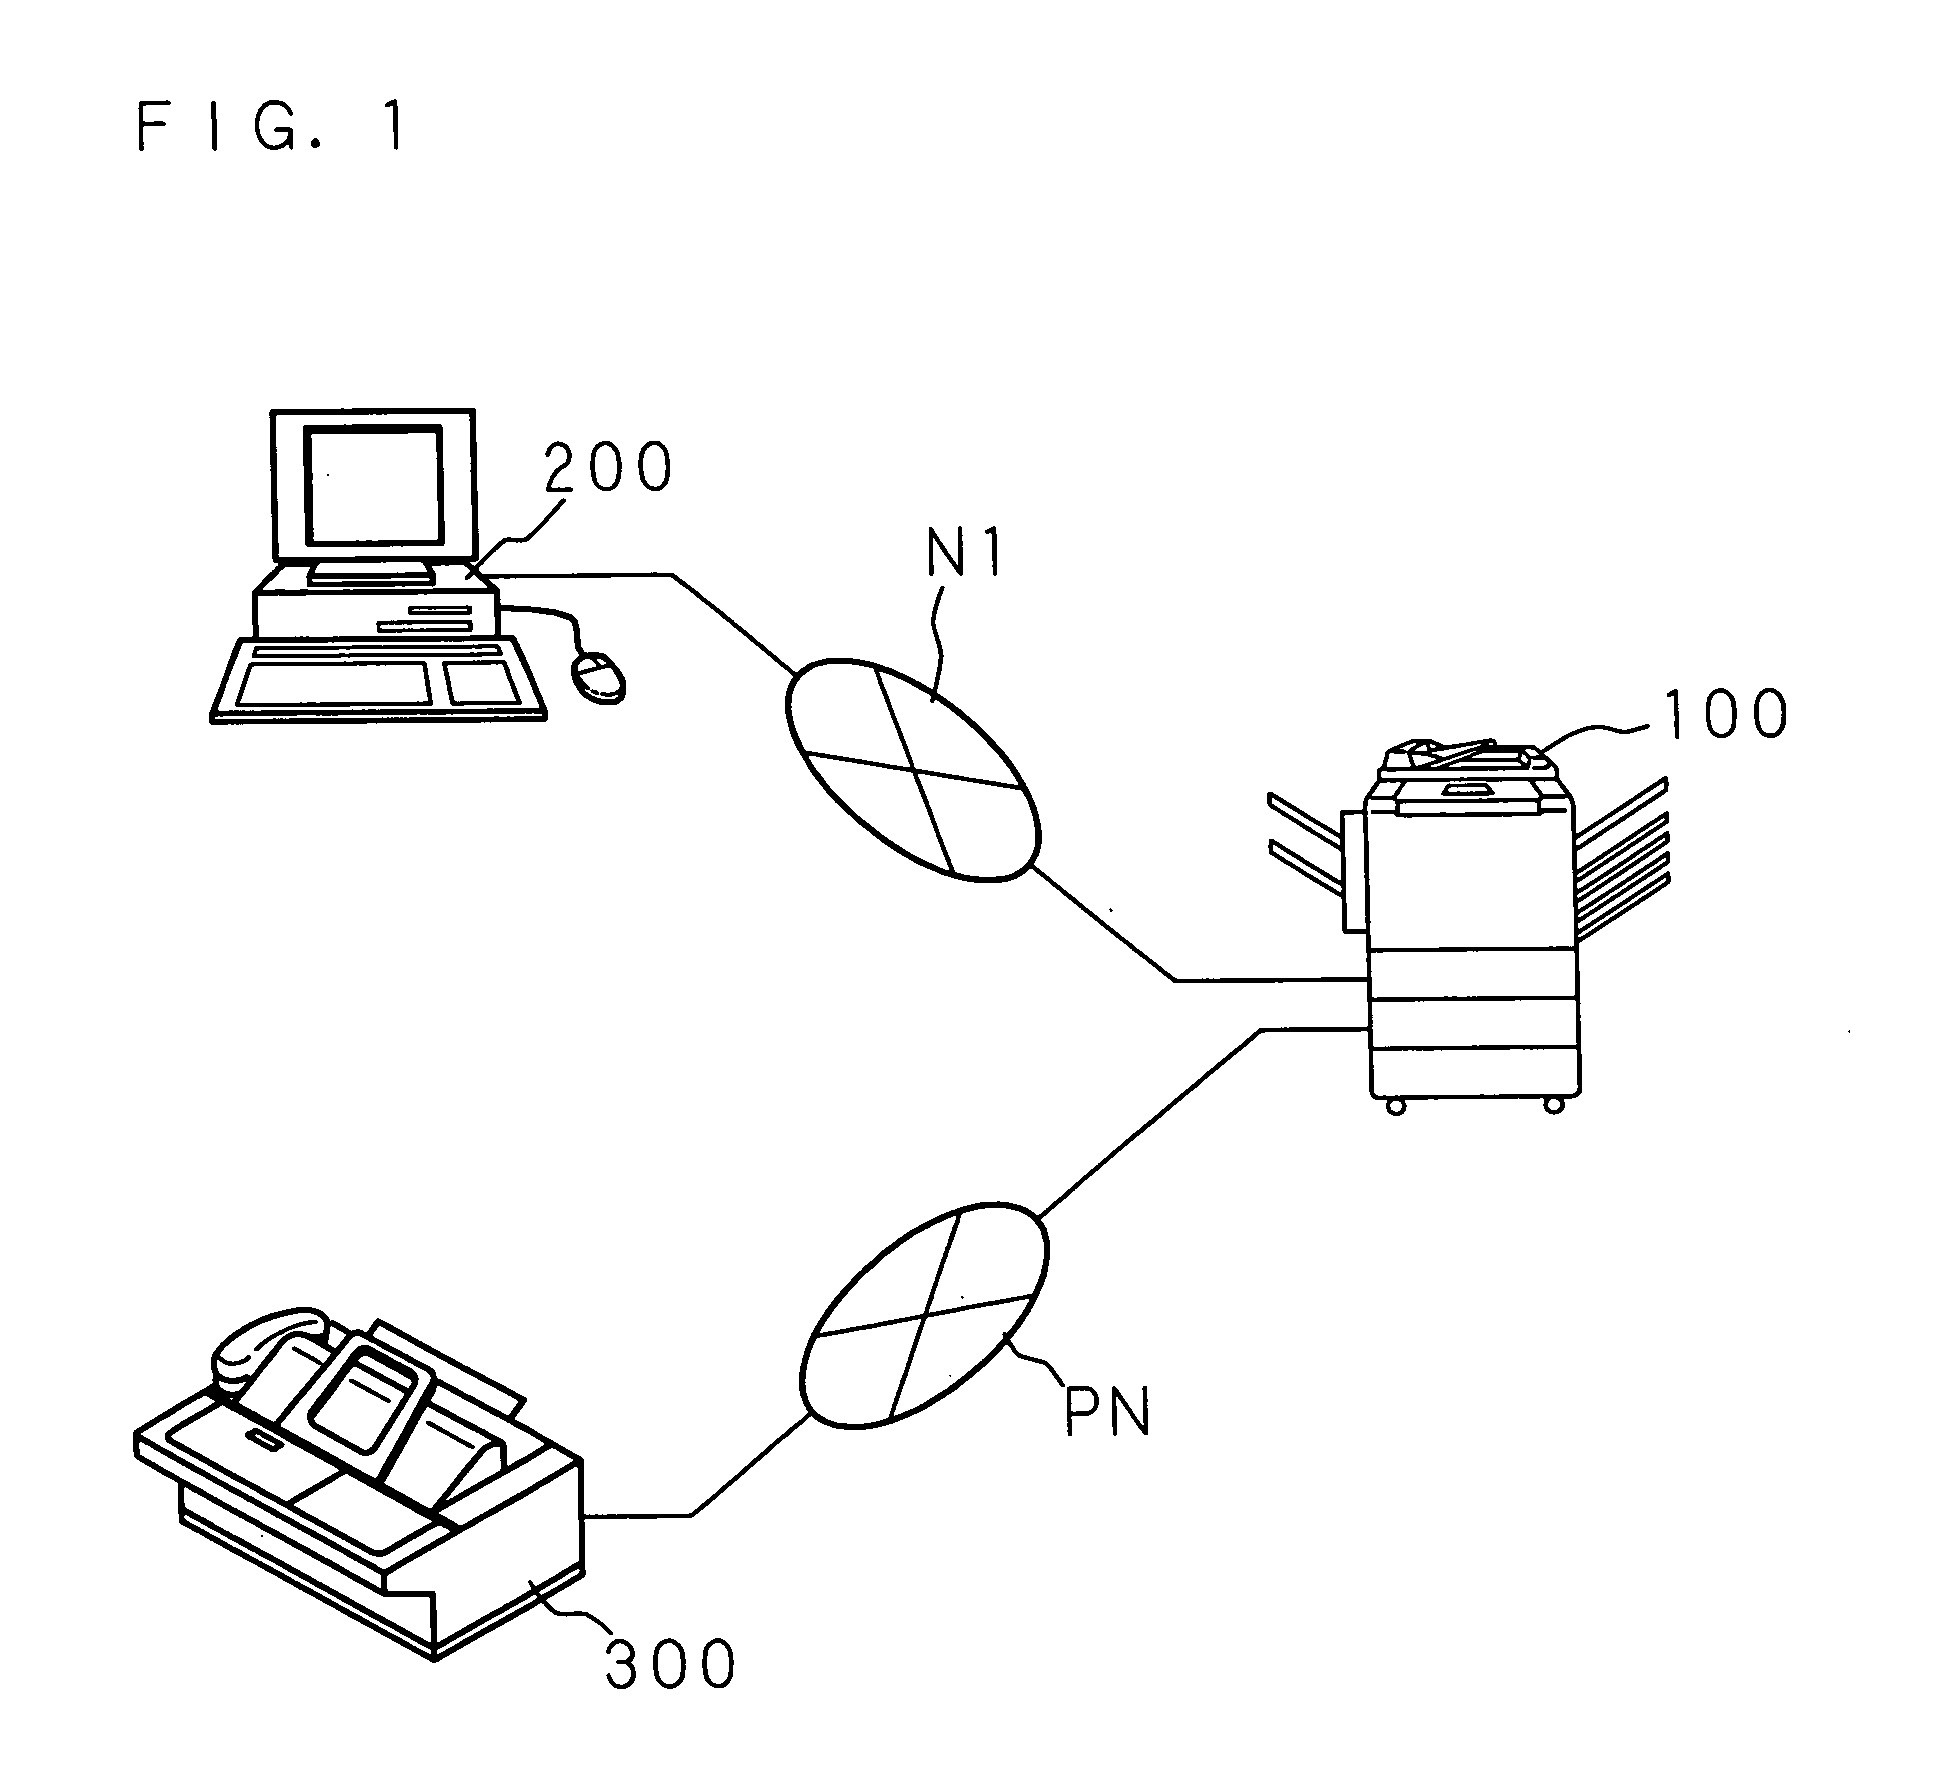 Image forming apparatus, image forming system and relaying apparatus